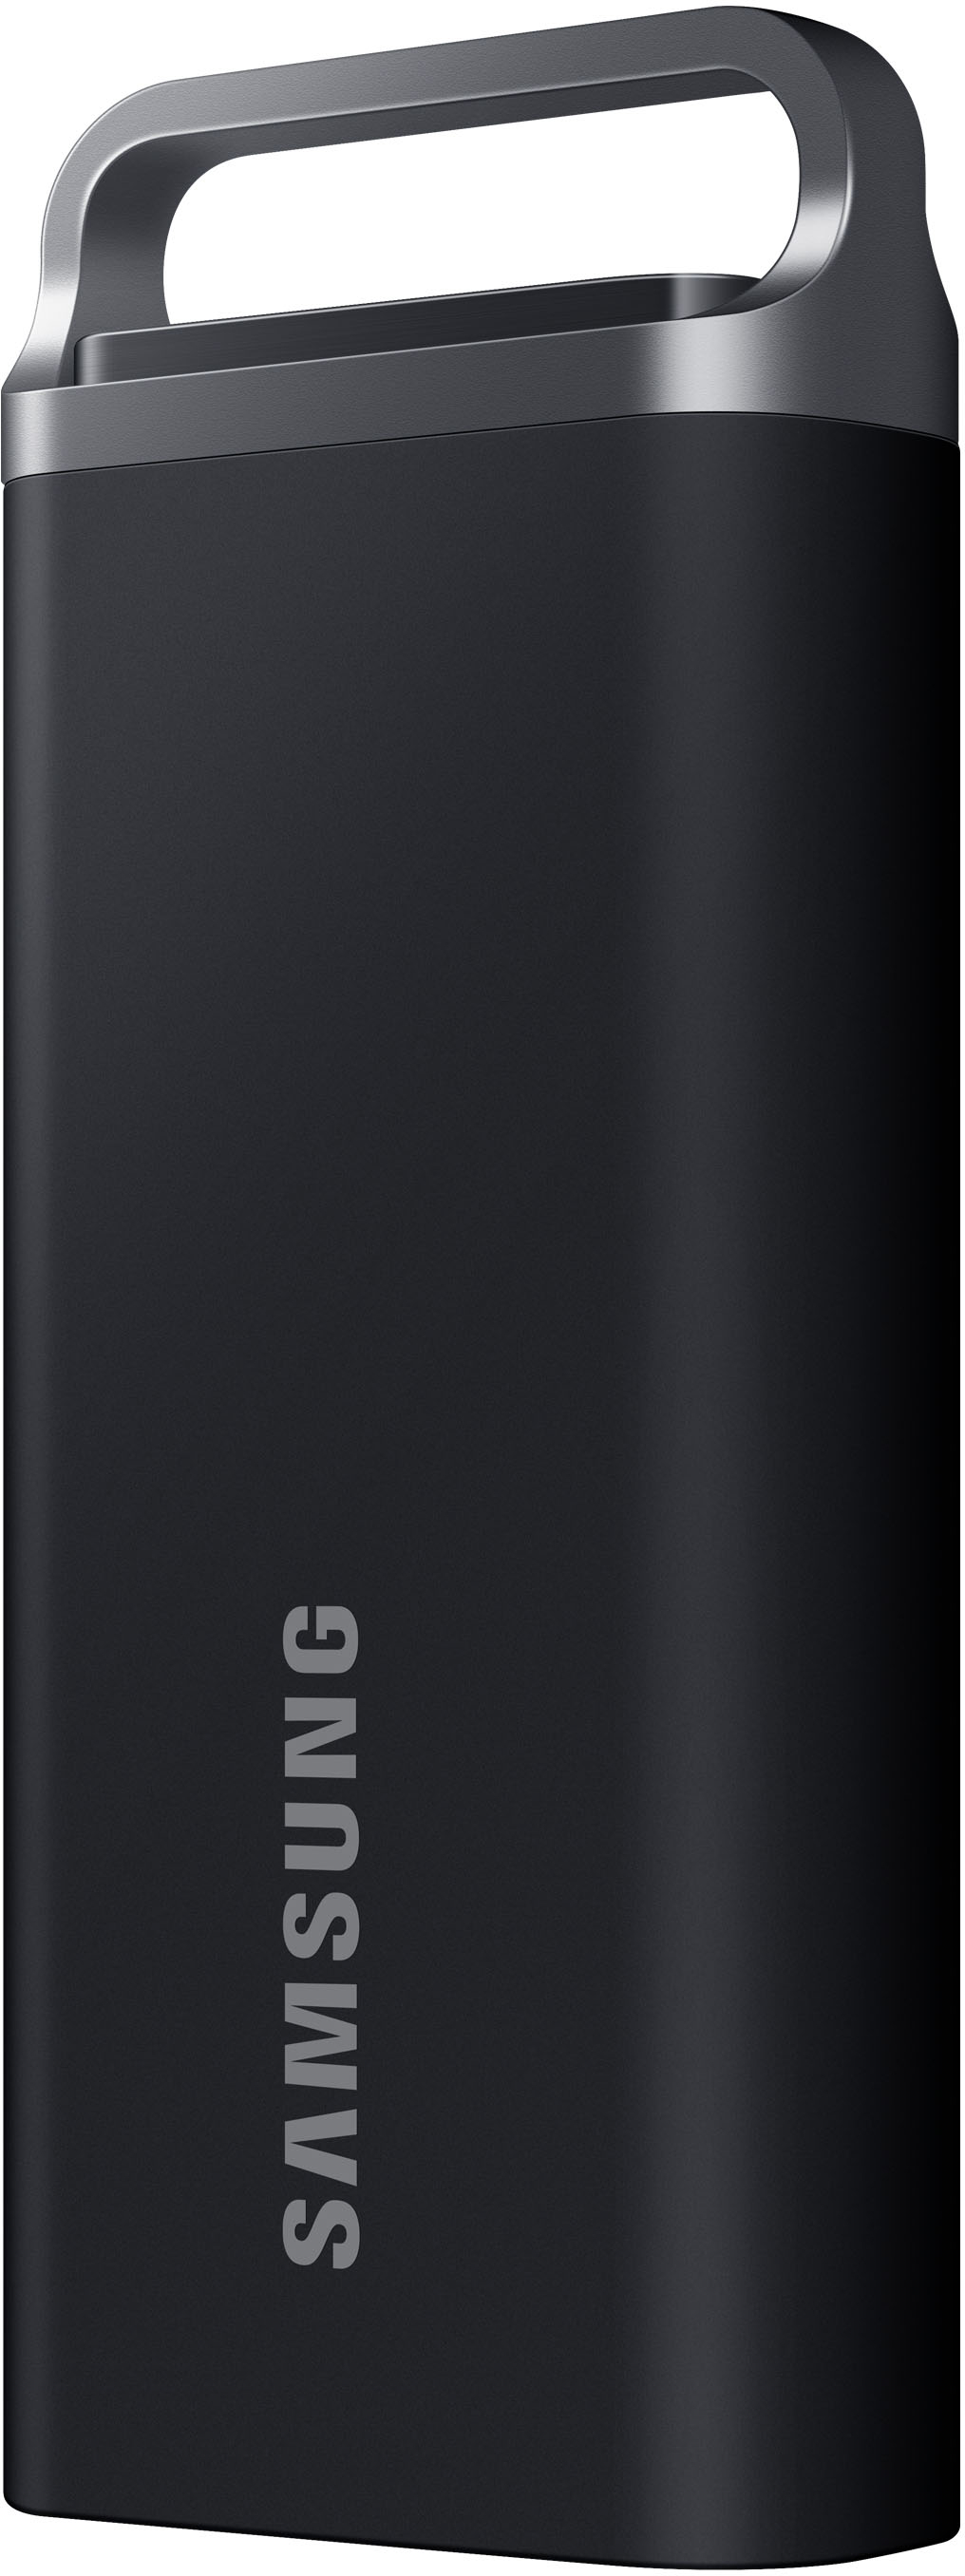 Samsung T5 EVO Portable SSD 2TB, Up to 460MB/s , USB 3.2 Gen 1, Ideal use  for Gamers & Creators Black MU-PH2T0S/AM - Best Buy